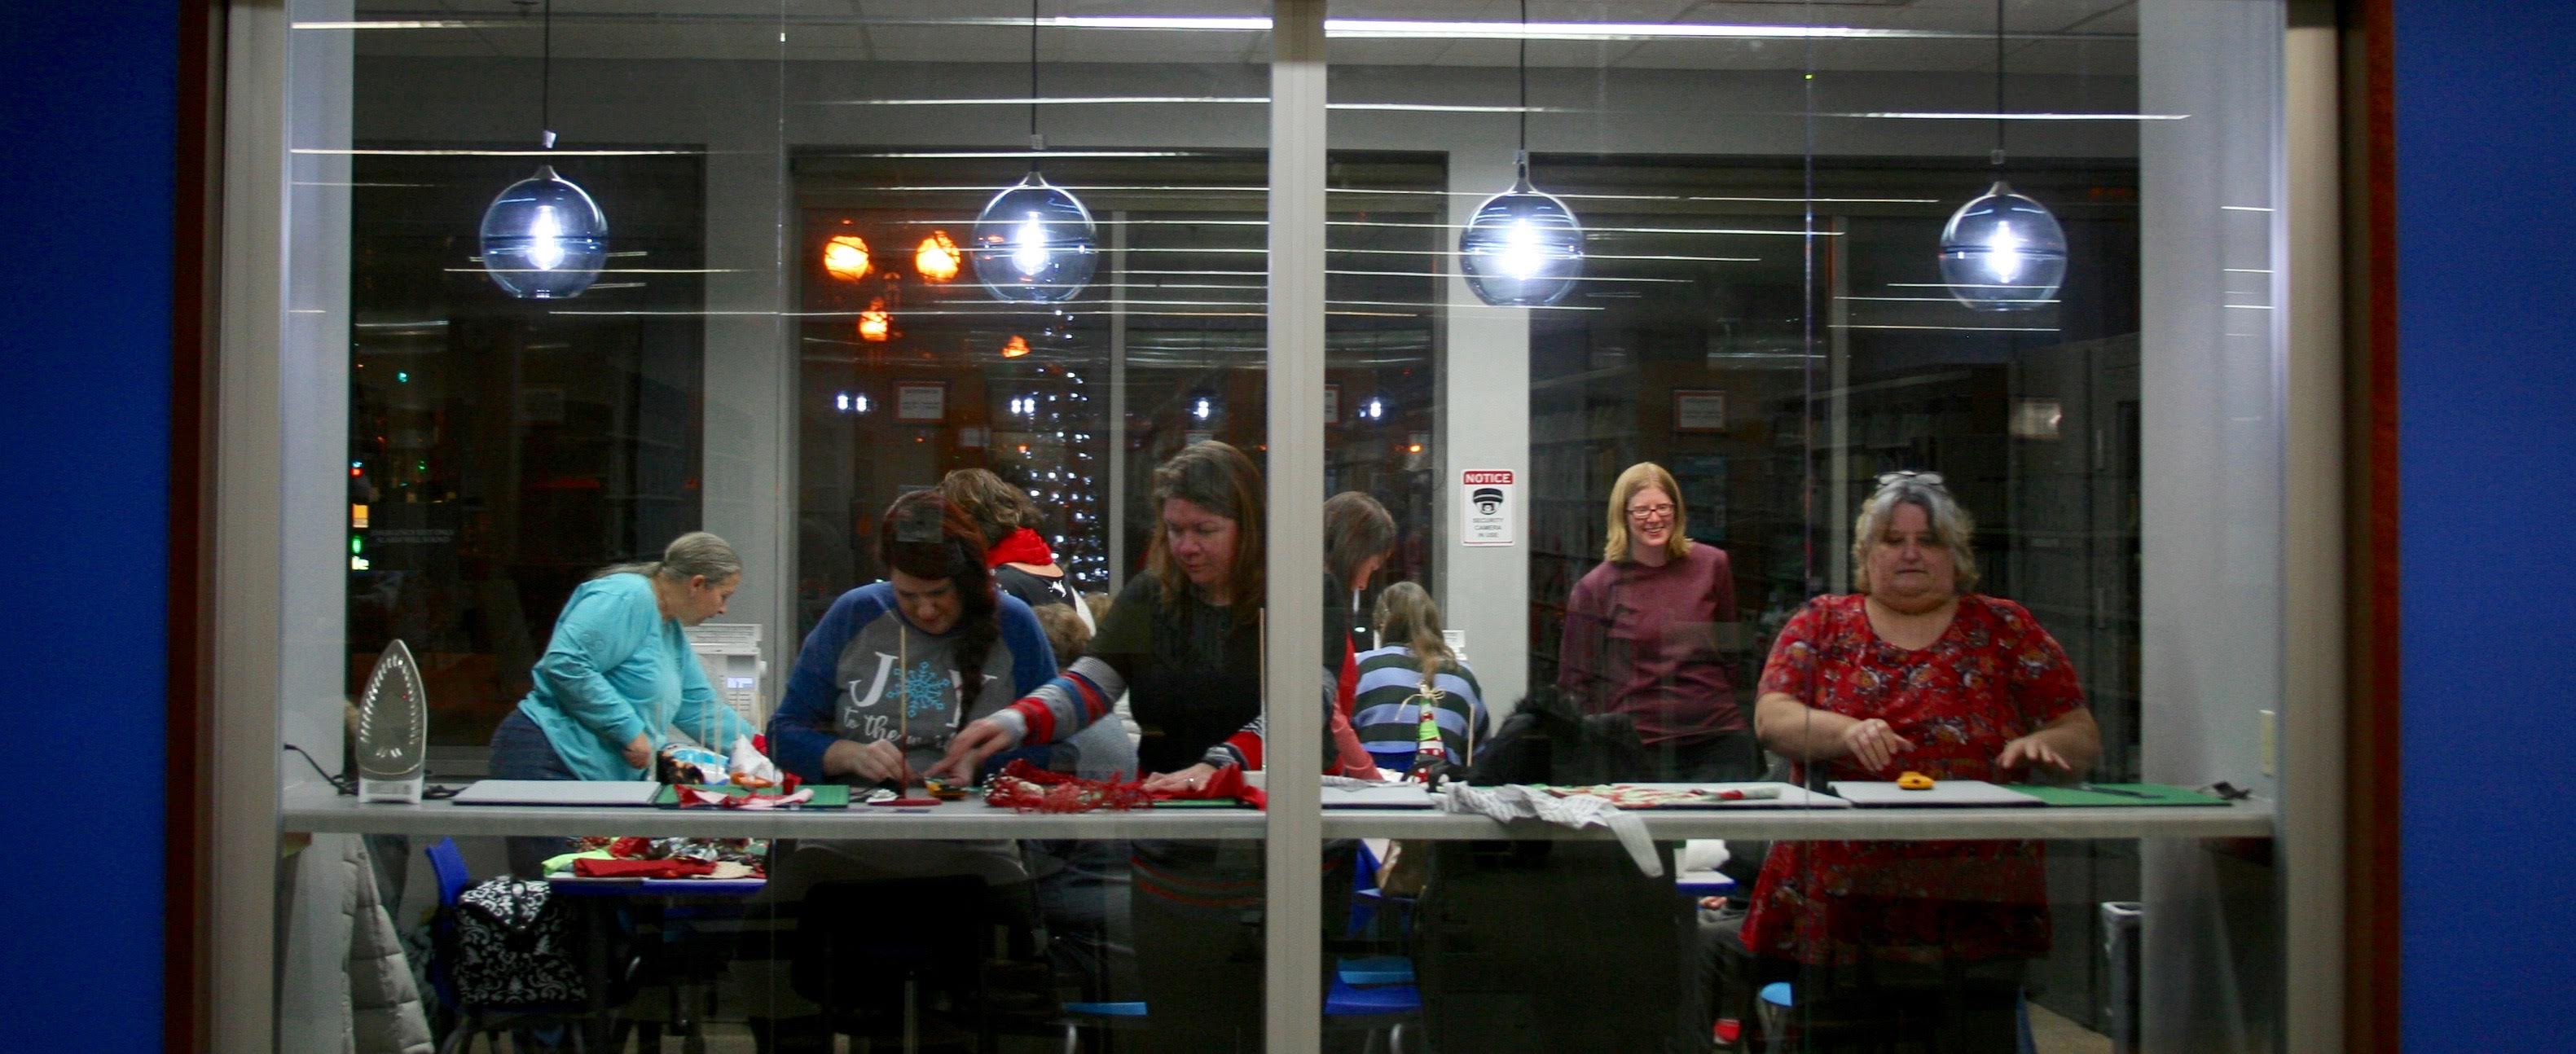 Patrons participating in Christmas craft event inside the Idea Box